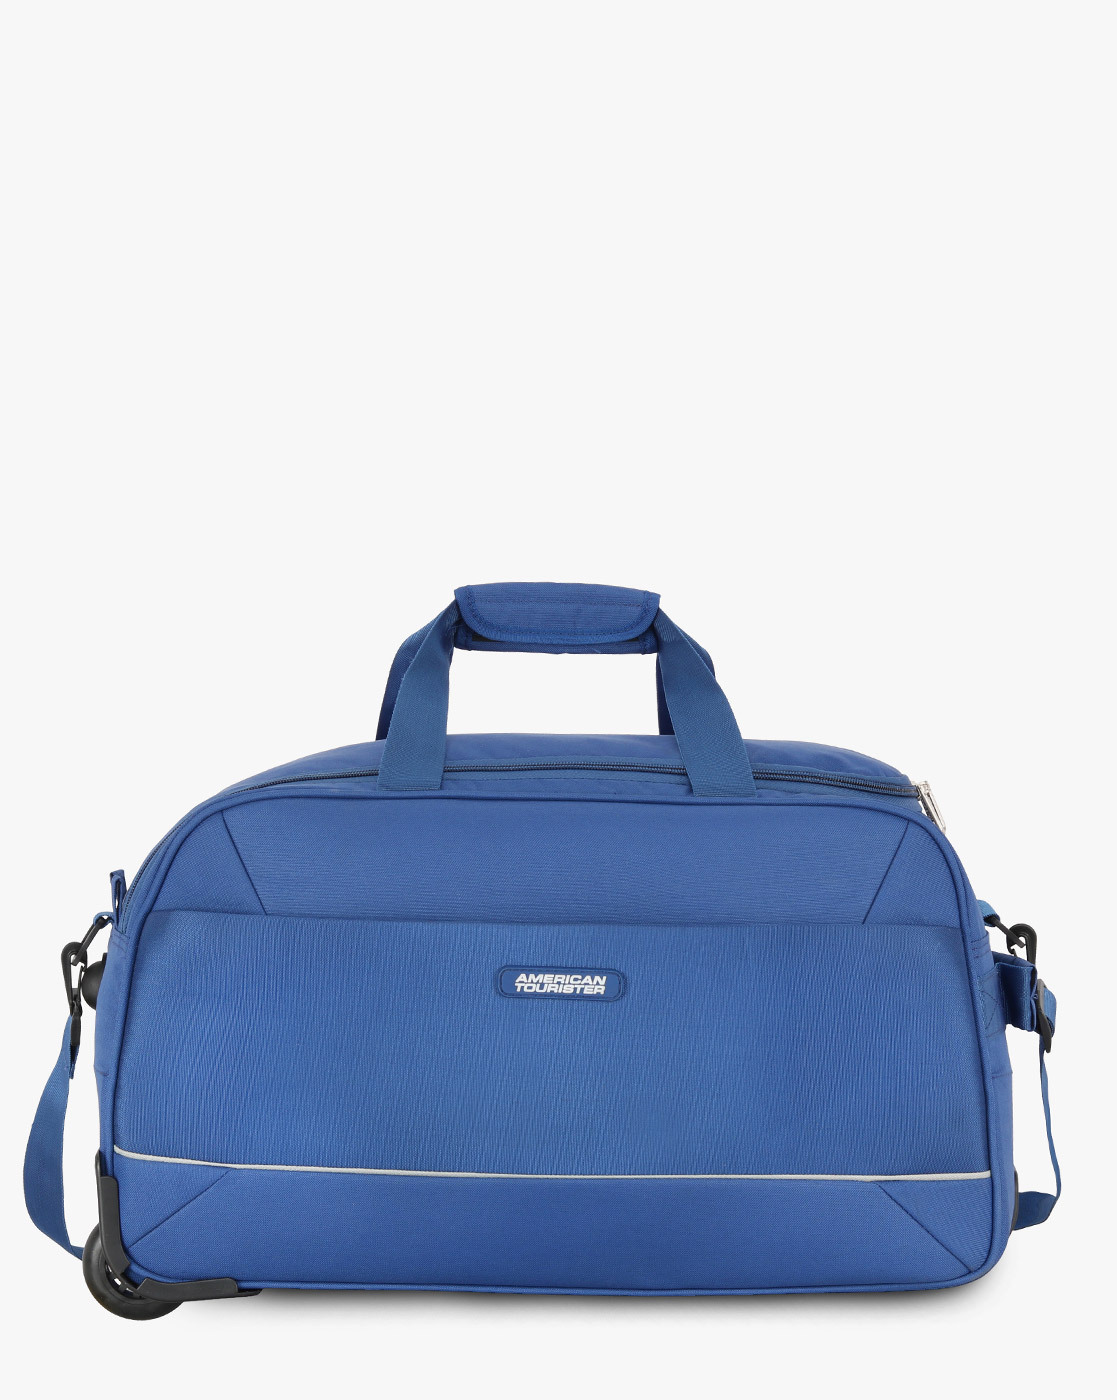 American Tourister Pirouette NXT 24